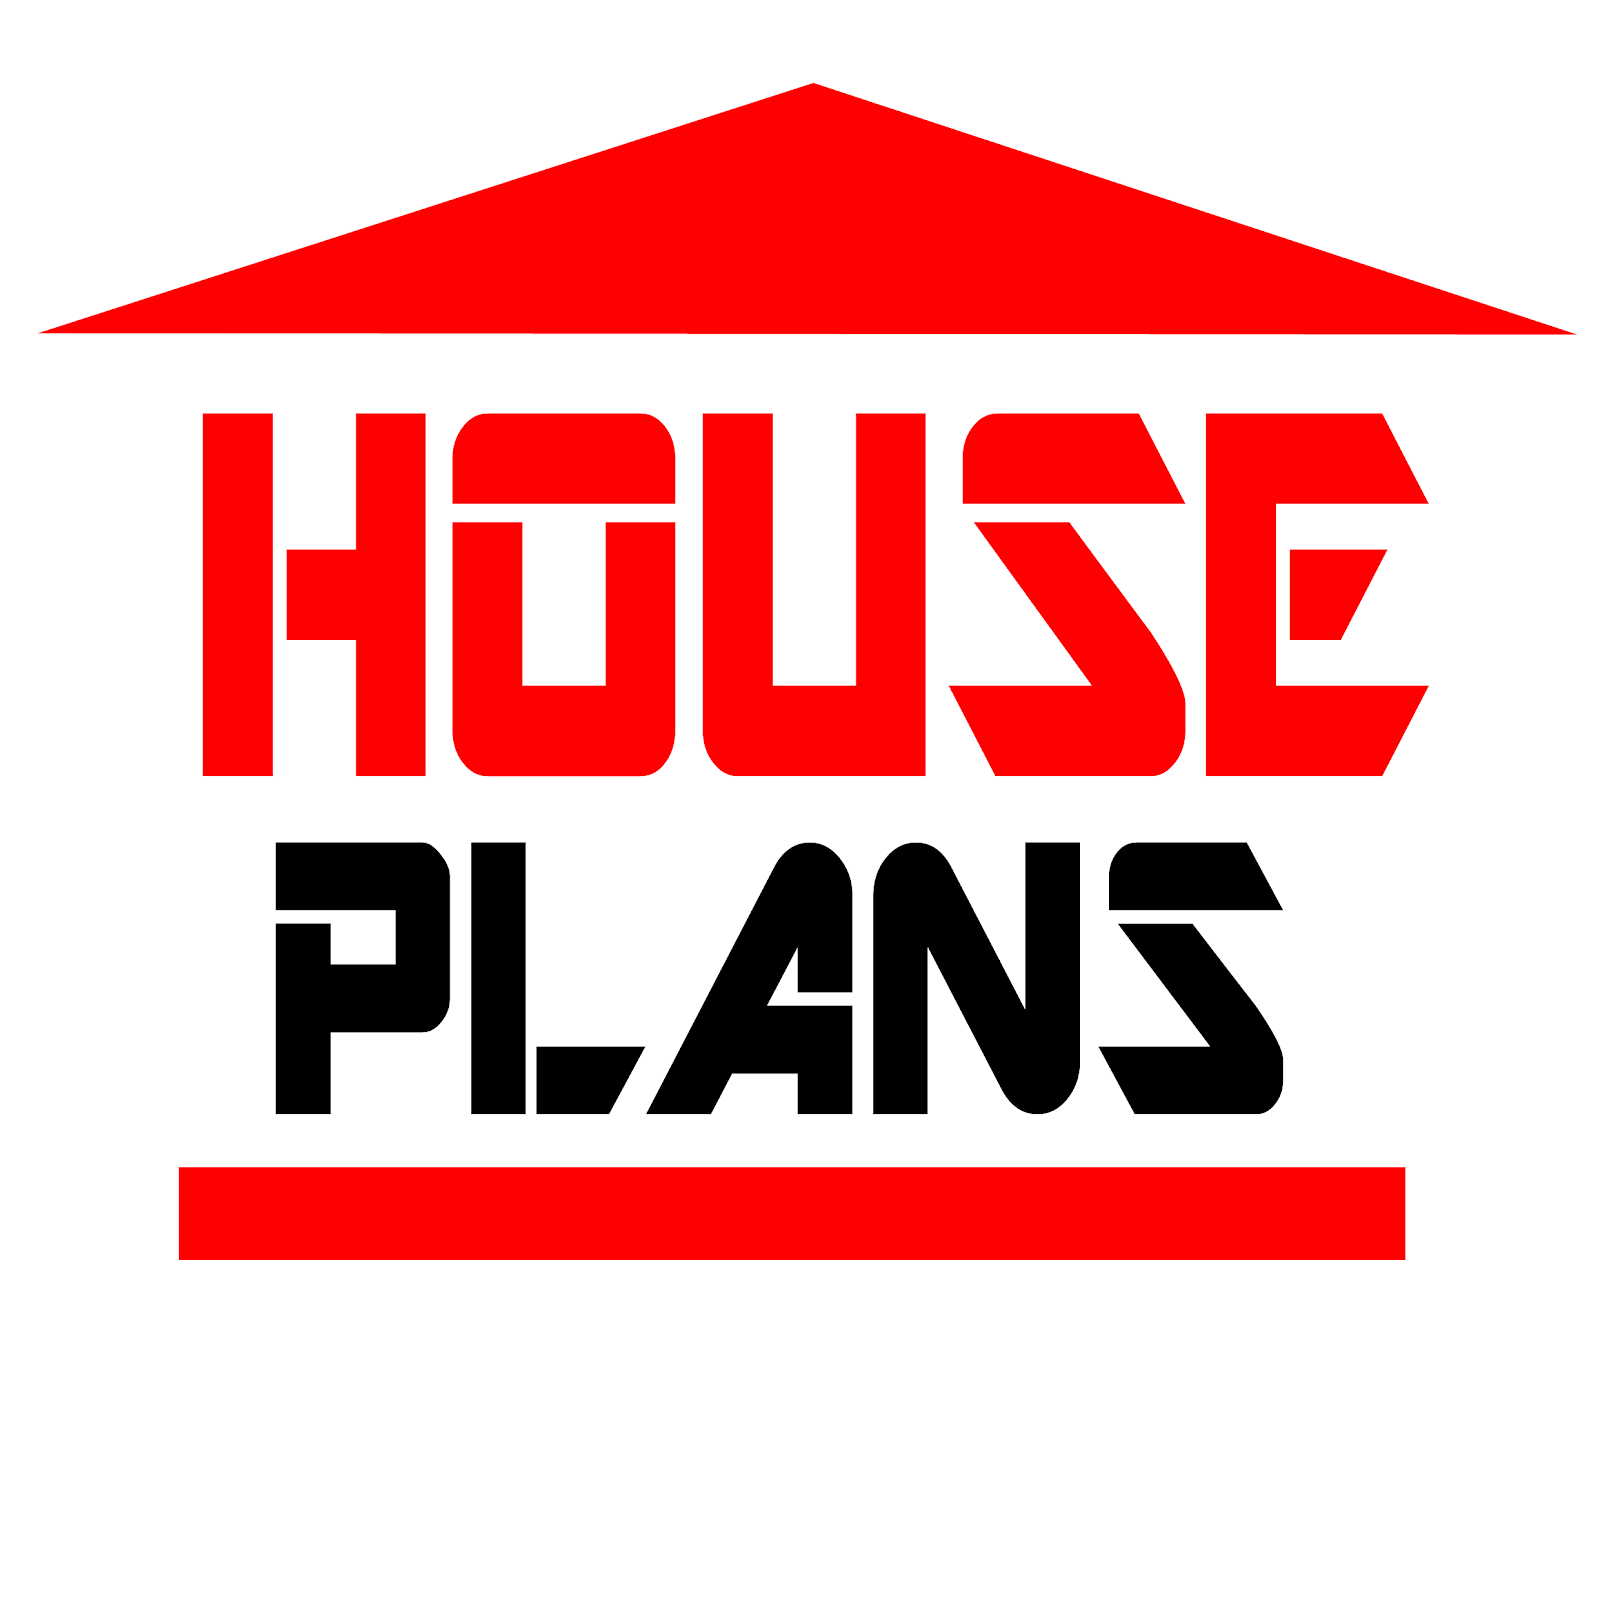 House Plans Youtube Channel